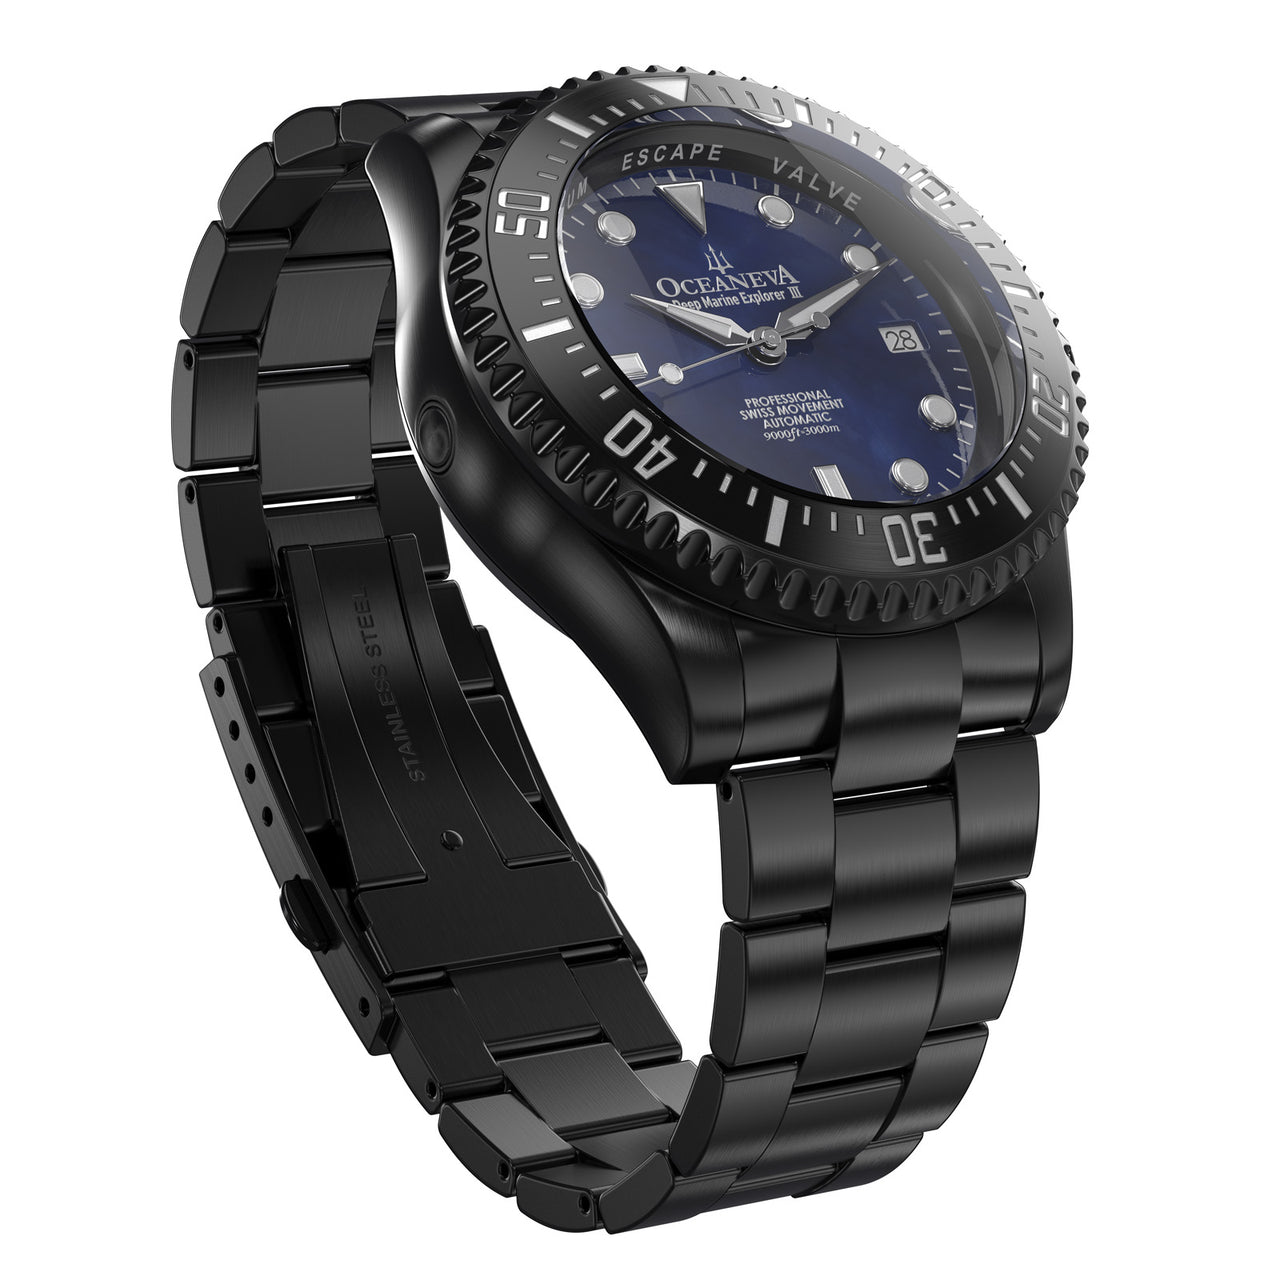 Oceaneva 3000M Dive Watch Navy Blue Mother of Pearl Front Picture Slight Right Slant View